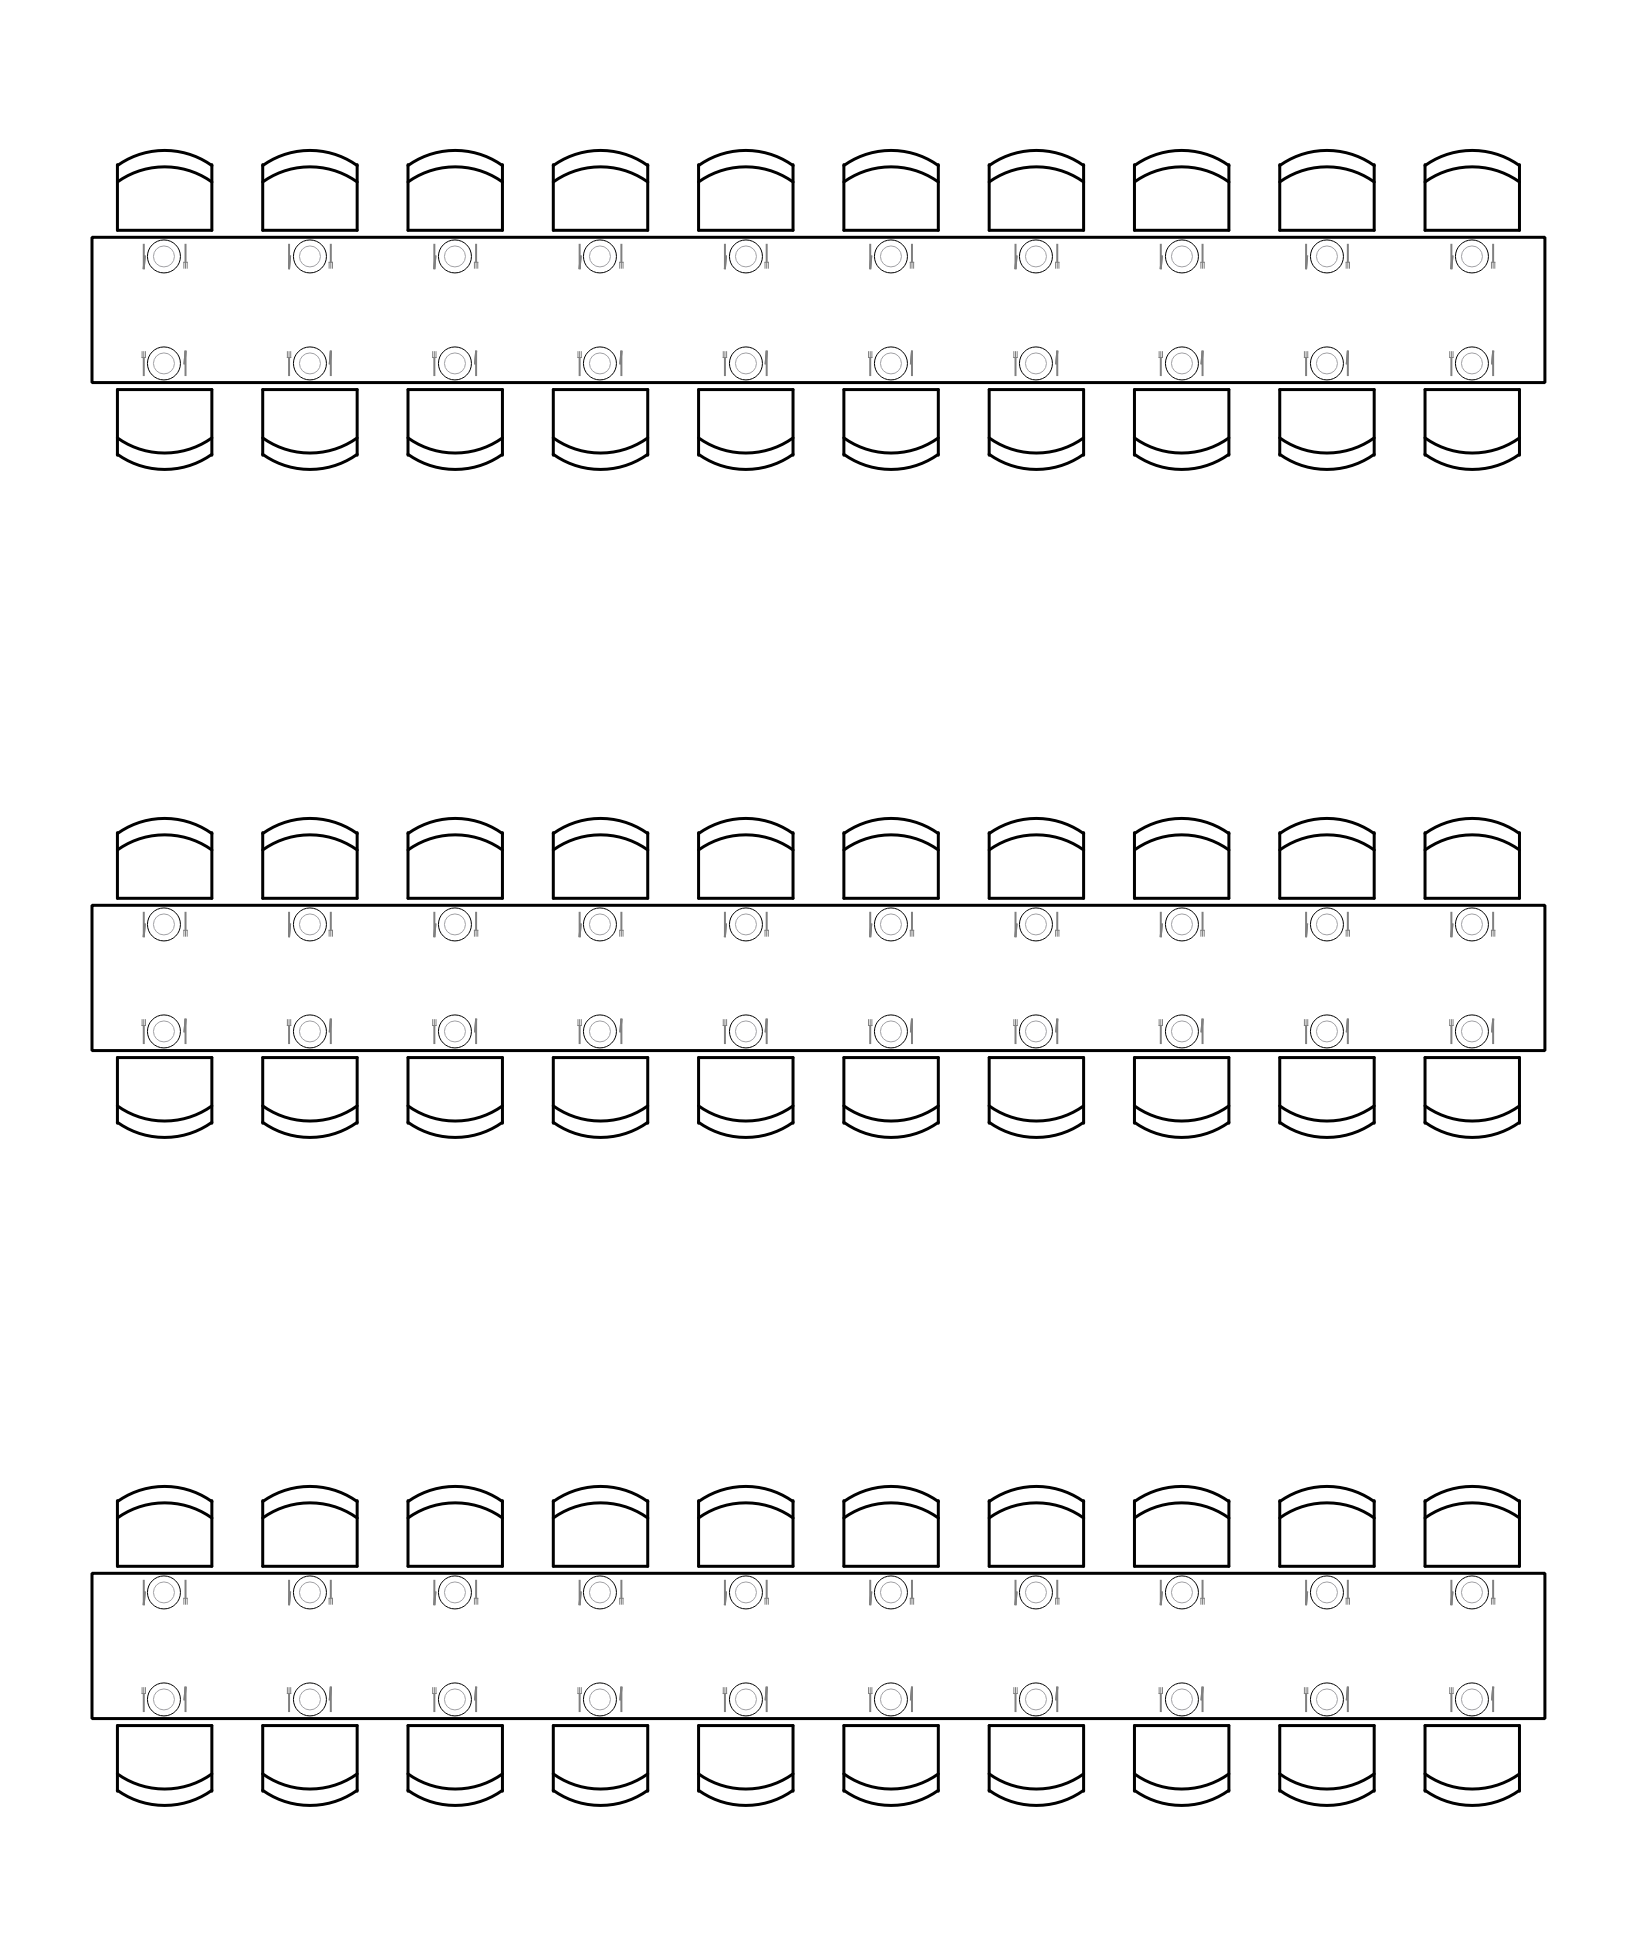 Table Seating Chart Template